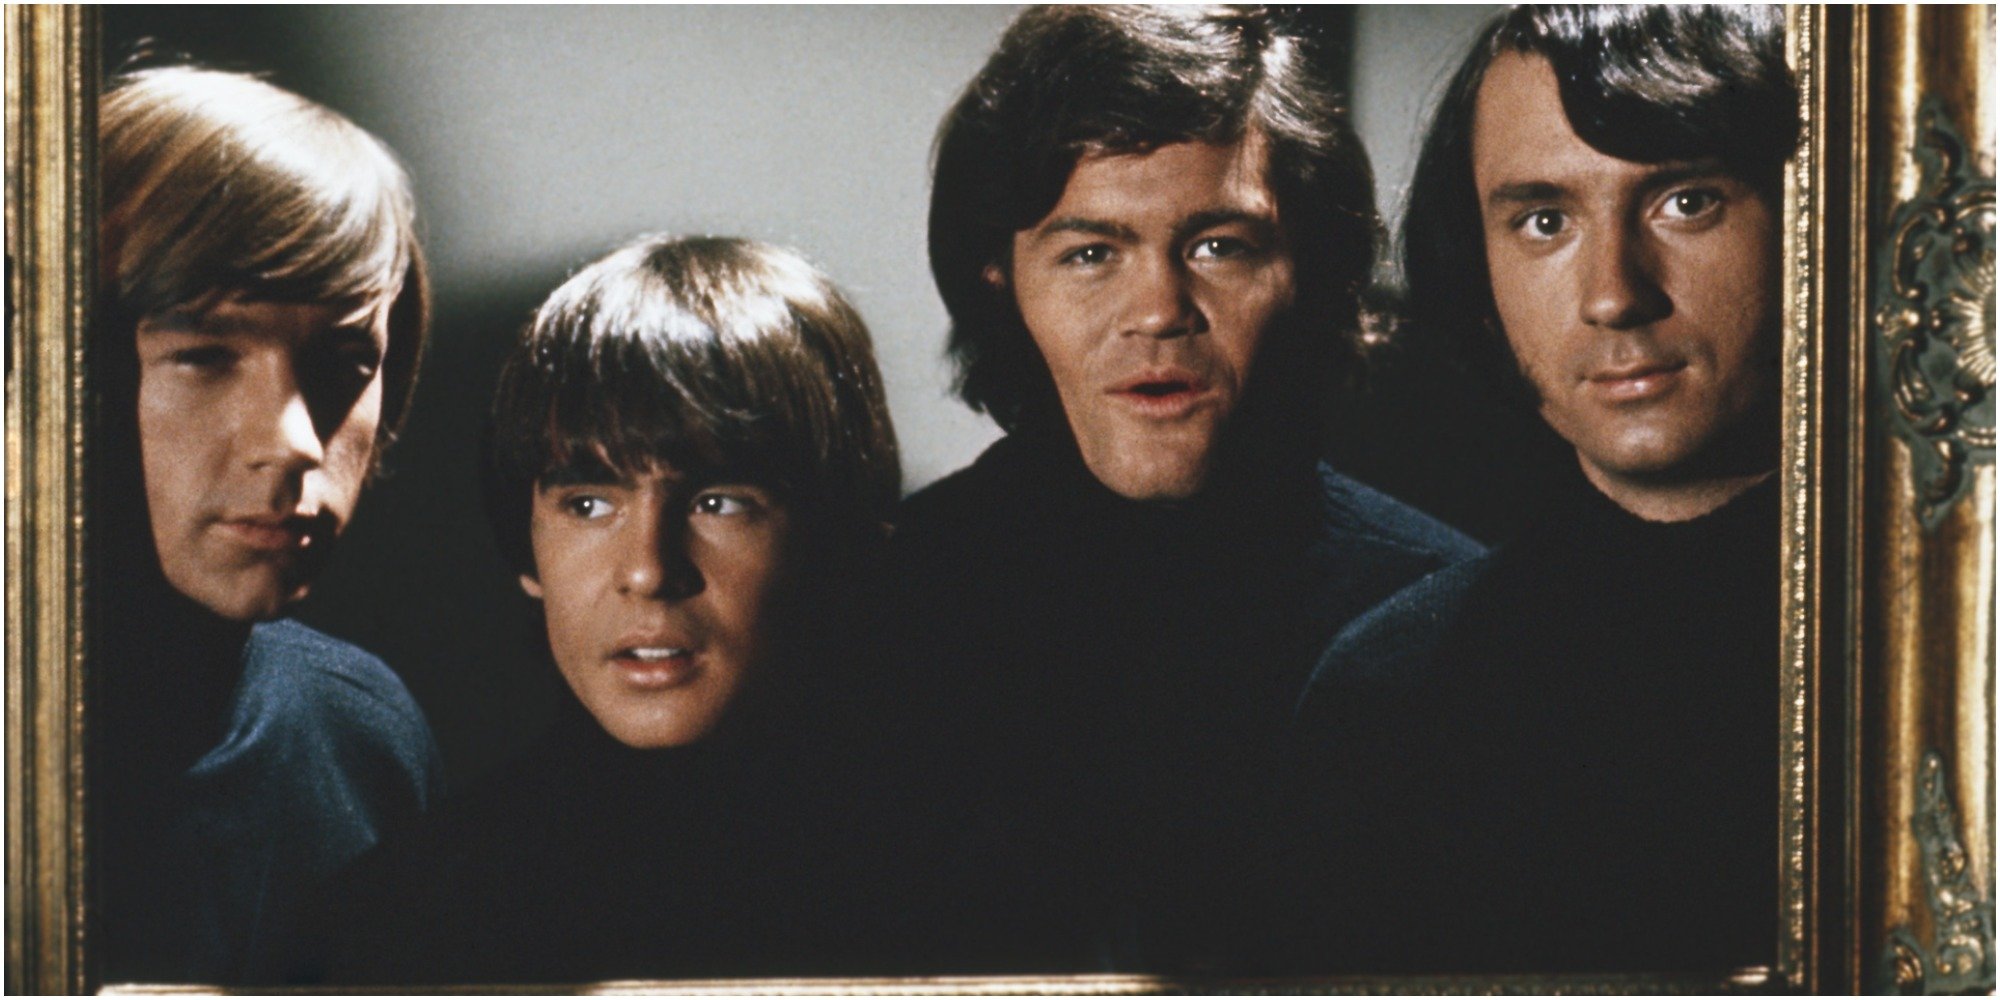 The Monkees pose in a picture frame.